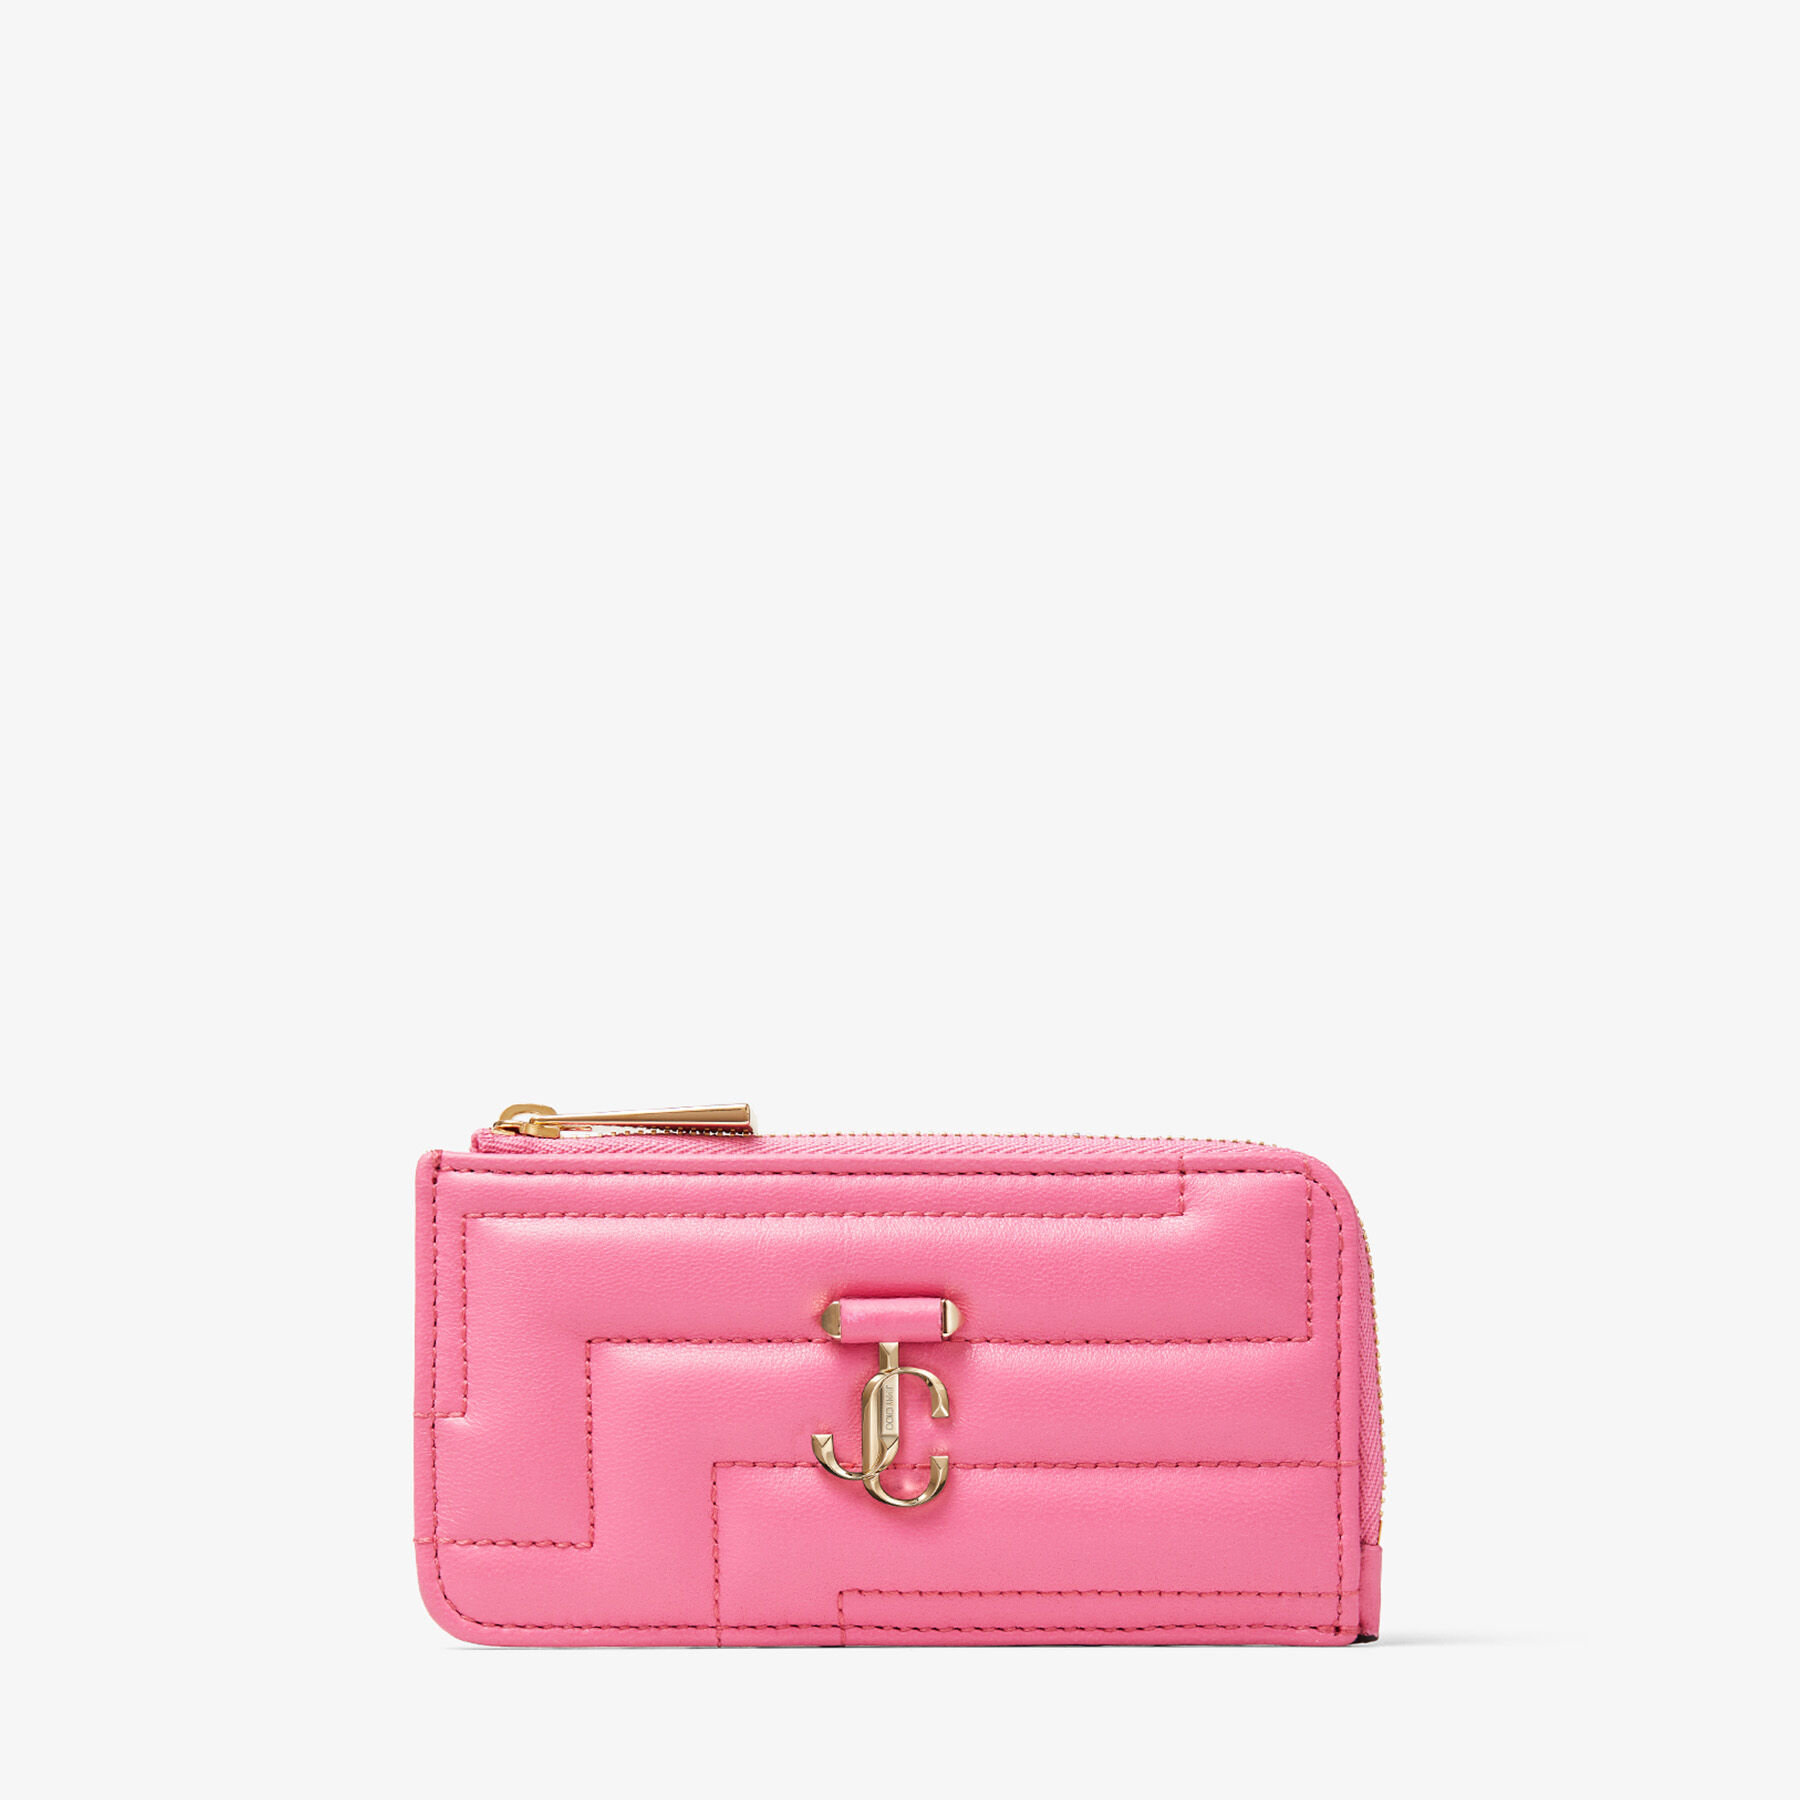 Candy Pink Quilted Nappa Leather Card Holder with JC Emblem | LISE-Z ...